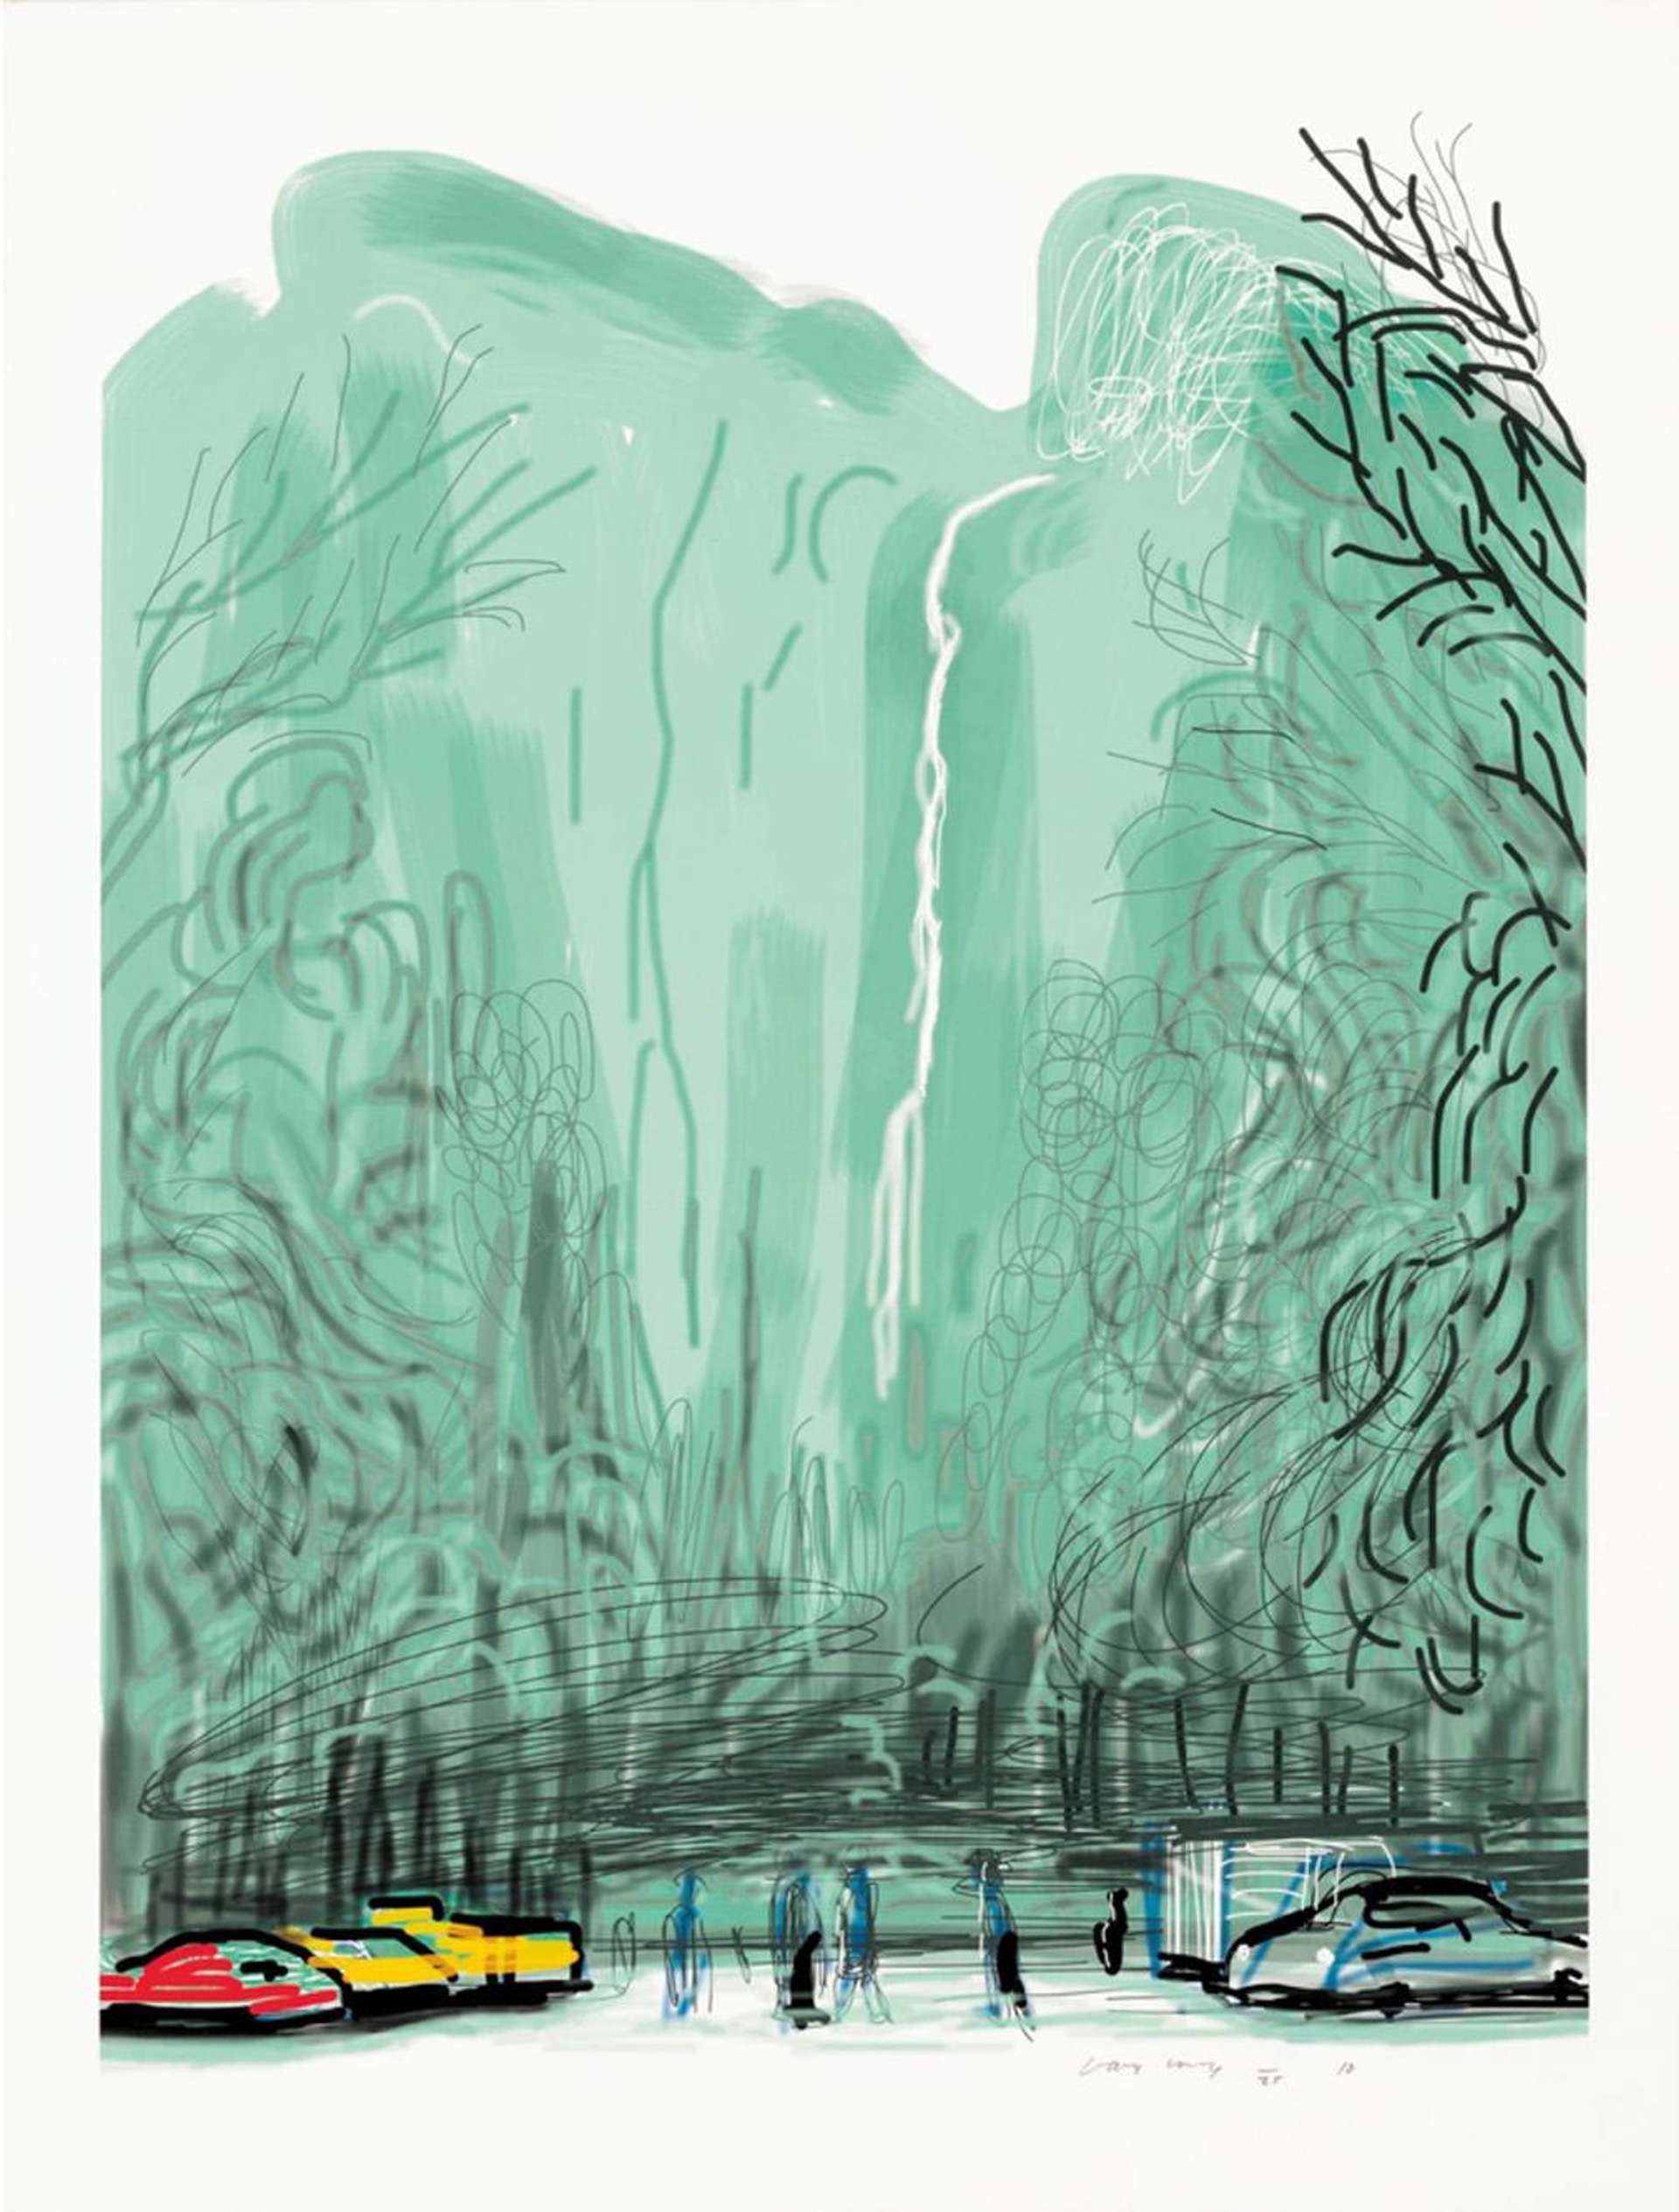 A view of a large Yosemite waterfall by David Hockney, depicted in tones of light green and grey.